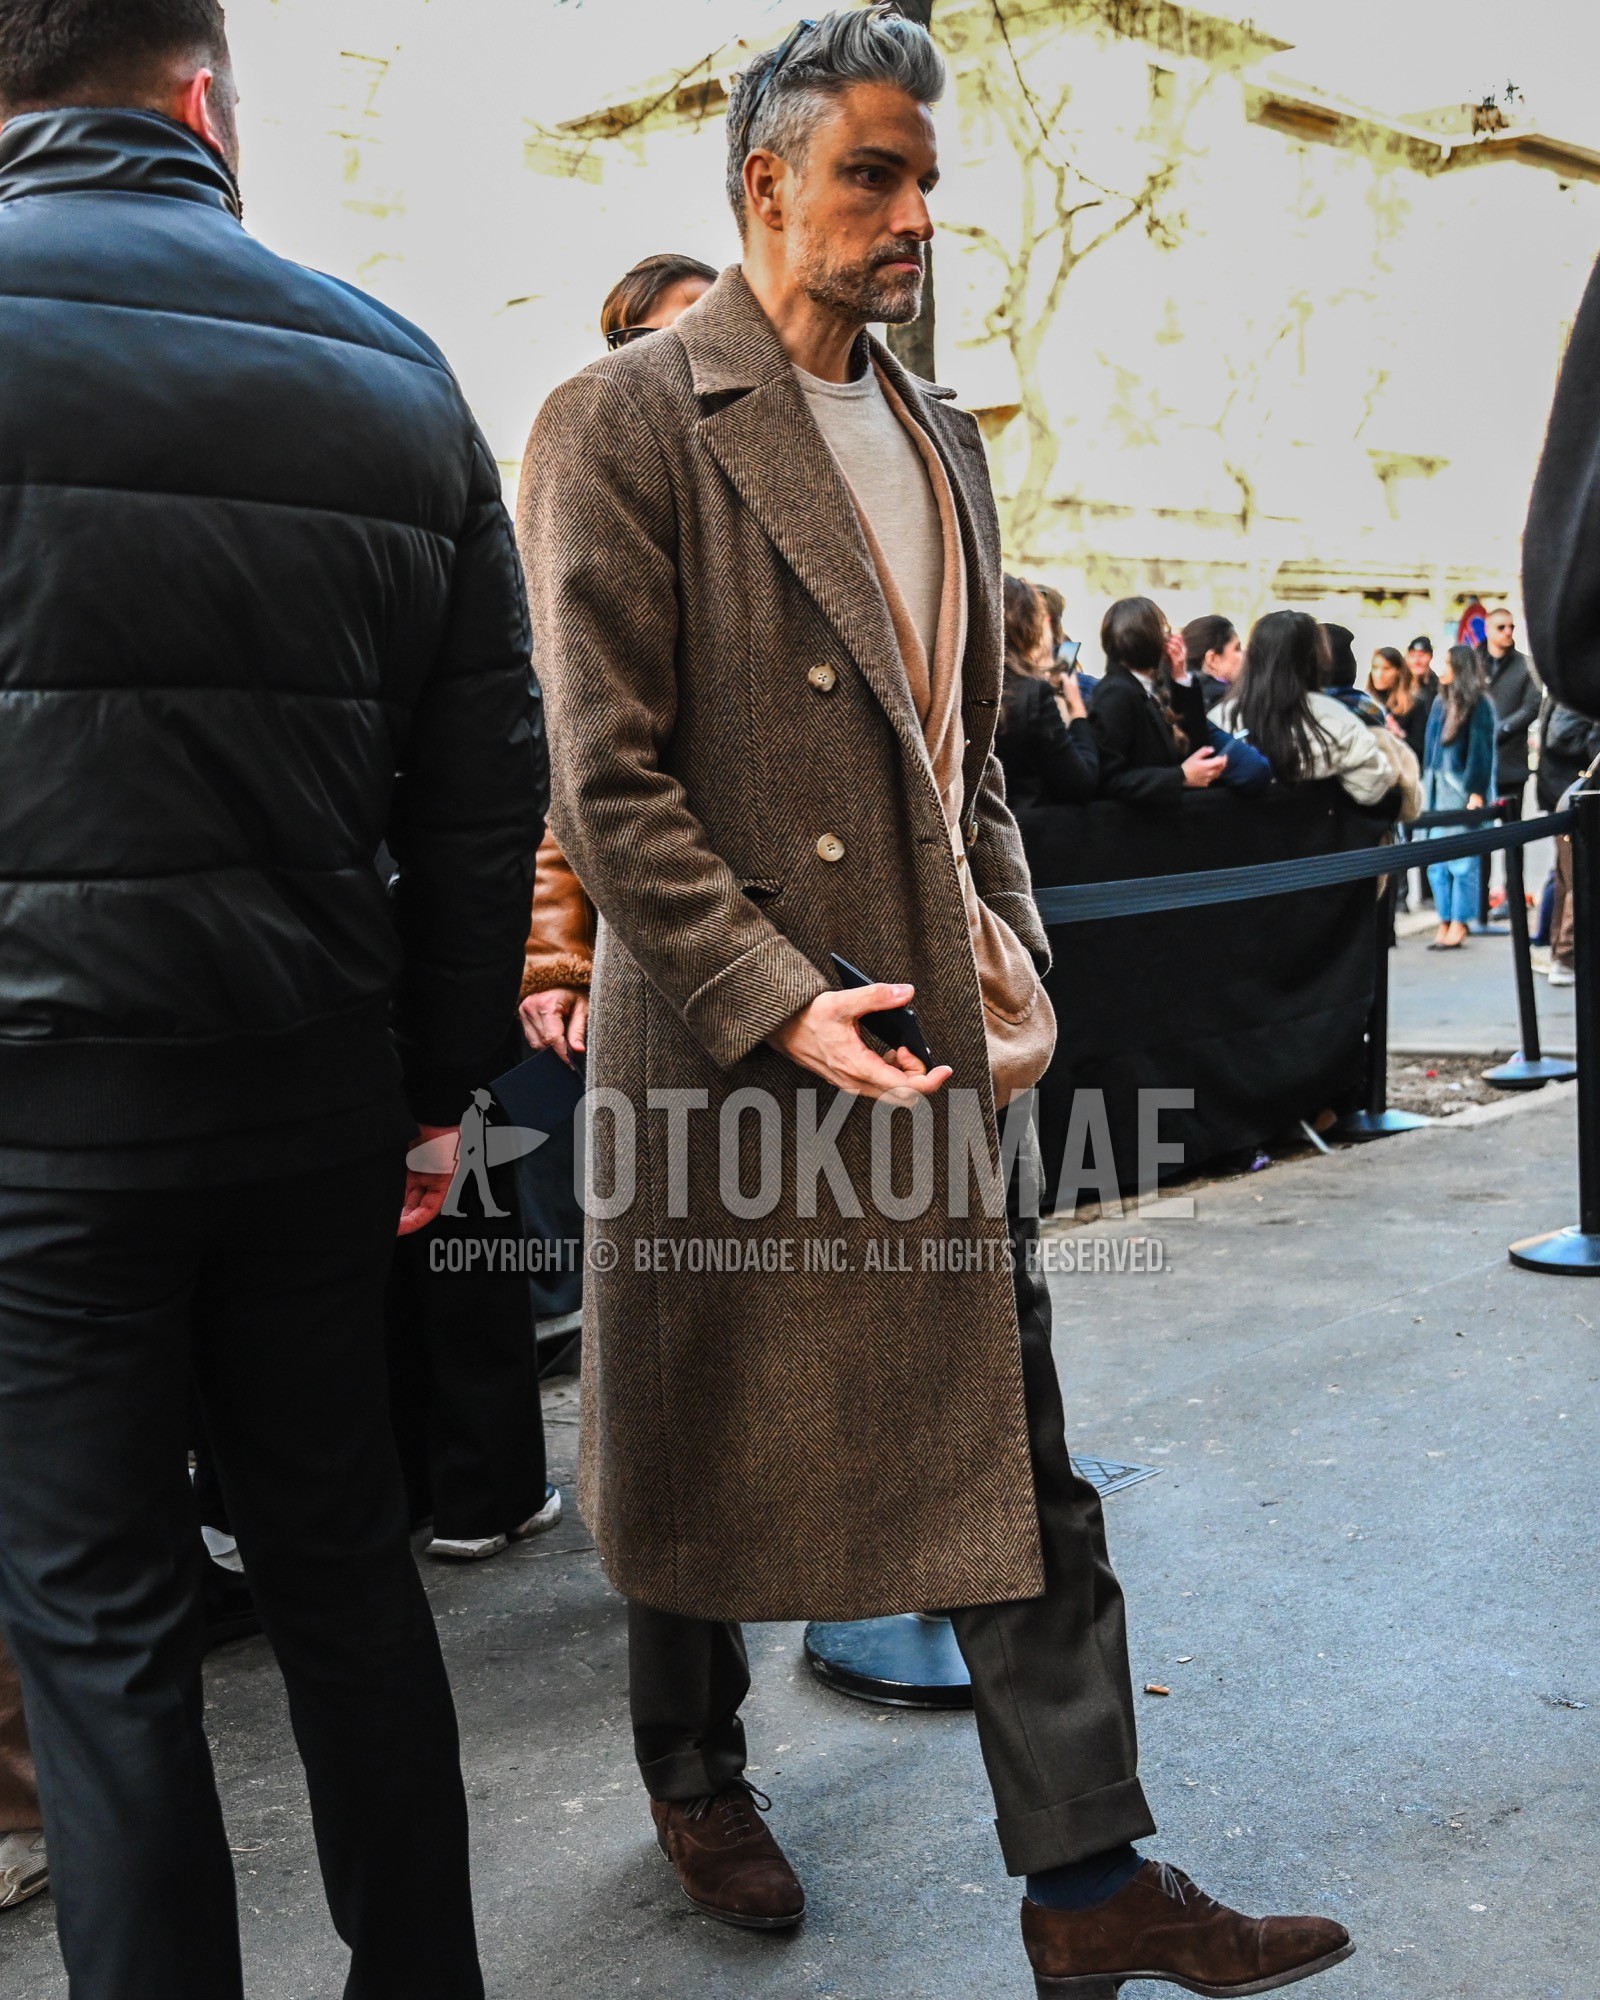 Men's autumn winter outfit with brown herringbone chester coat, brown plain tailored jacket, beige plain sweater, gray plain slacks, navy plain socks, brown straight-tip shoes leather shoes.